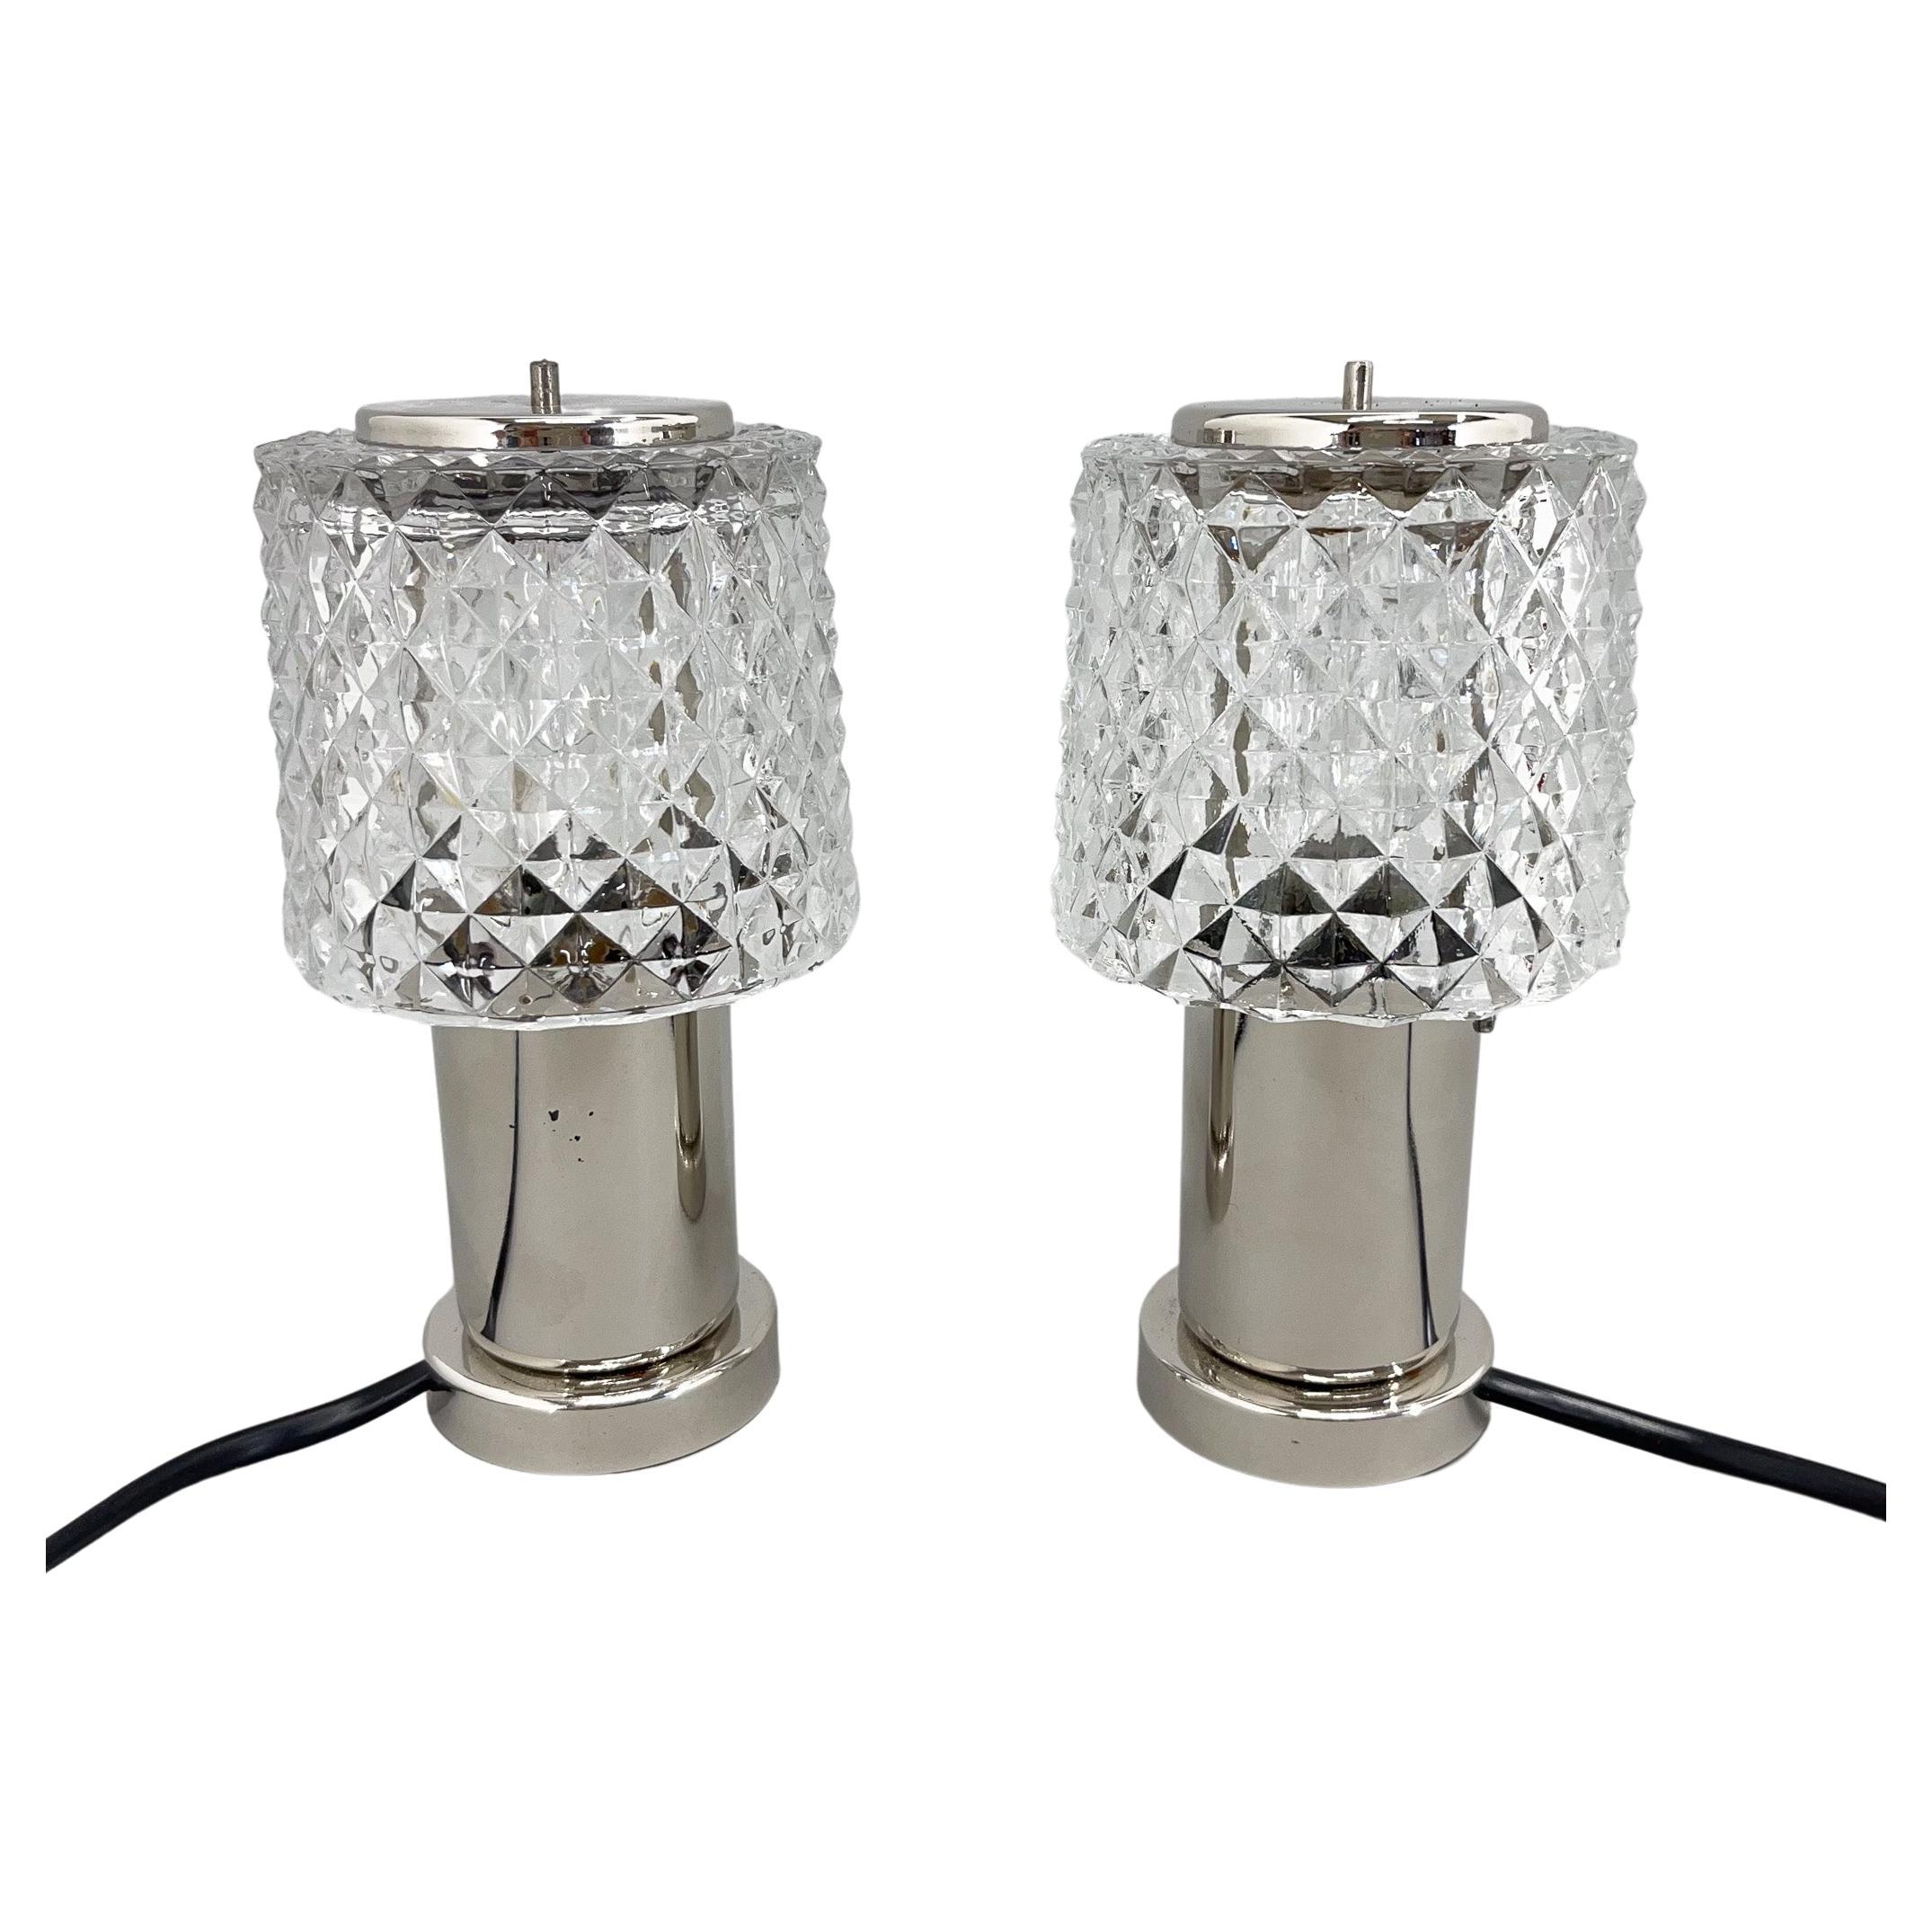 Pair of Mid-Century Chrome Table Lamps, 1960's / 4 Pairs Available For Sale